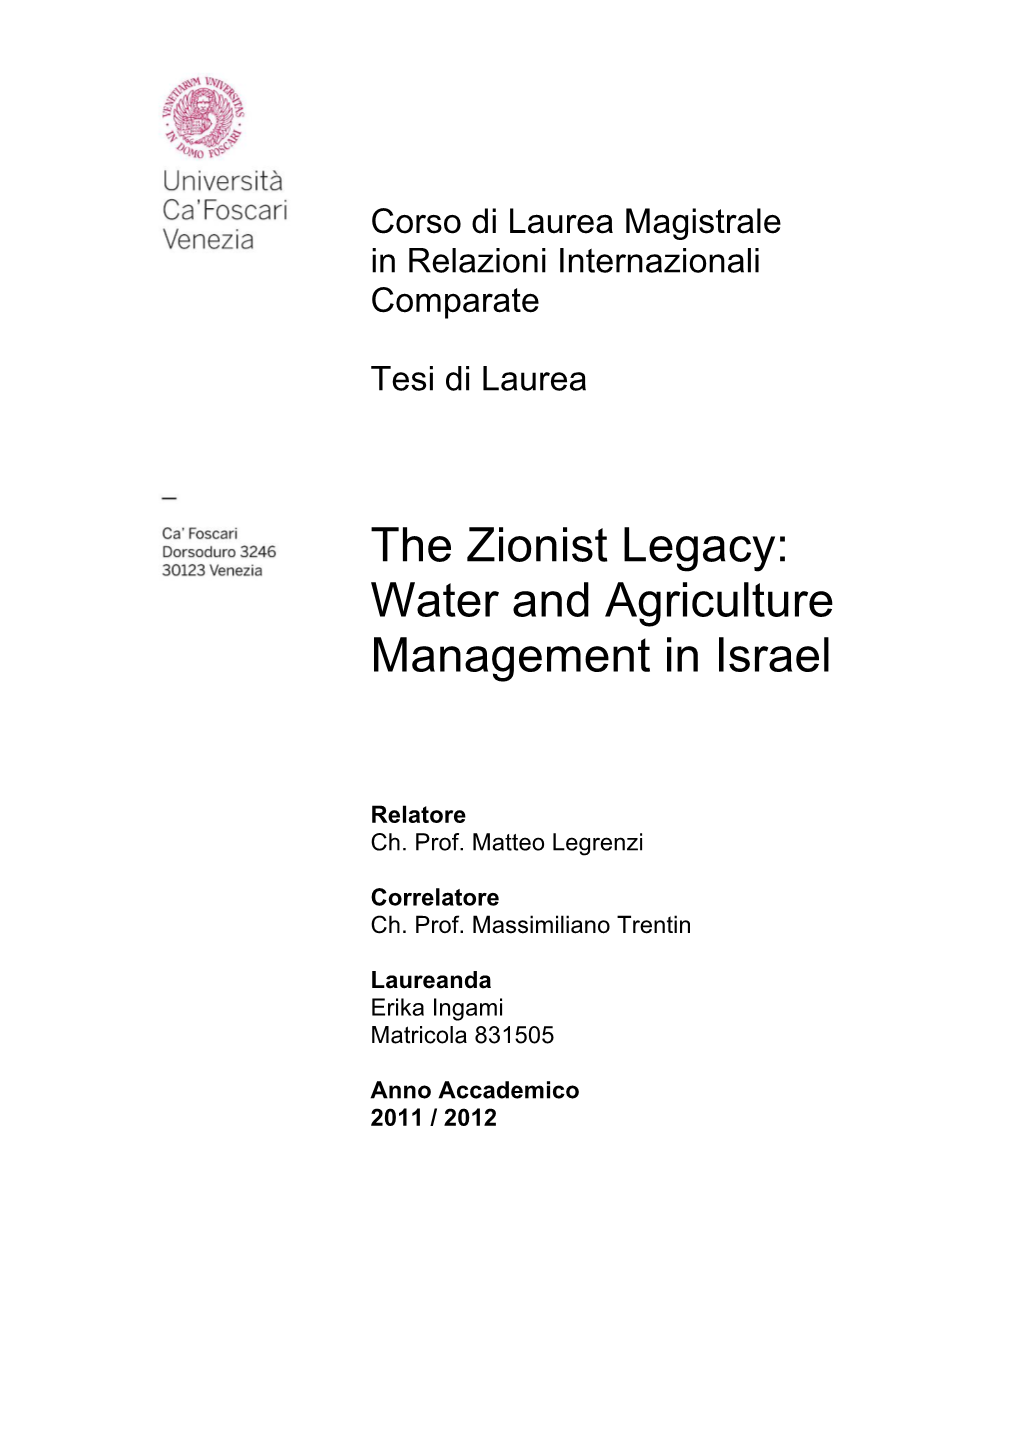 The Zionist Legacy: Water and Agriculture Management in Israel